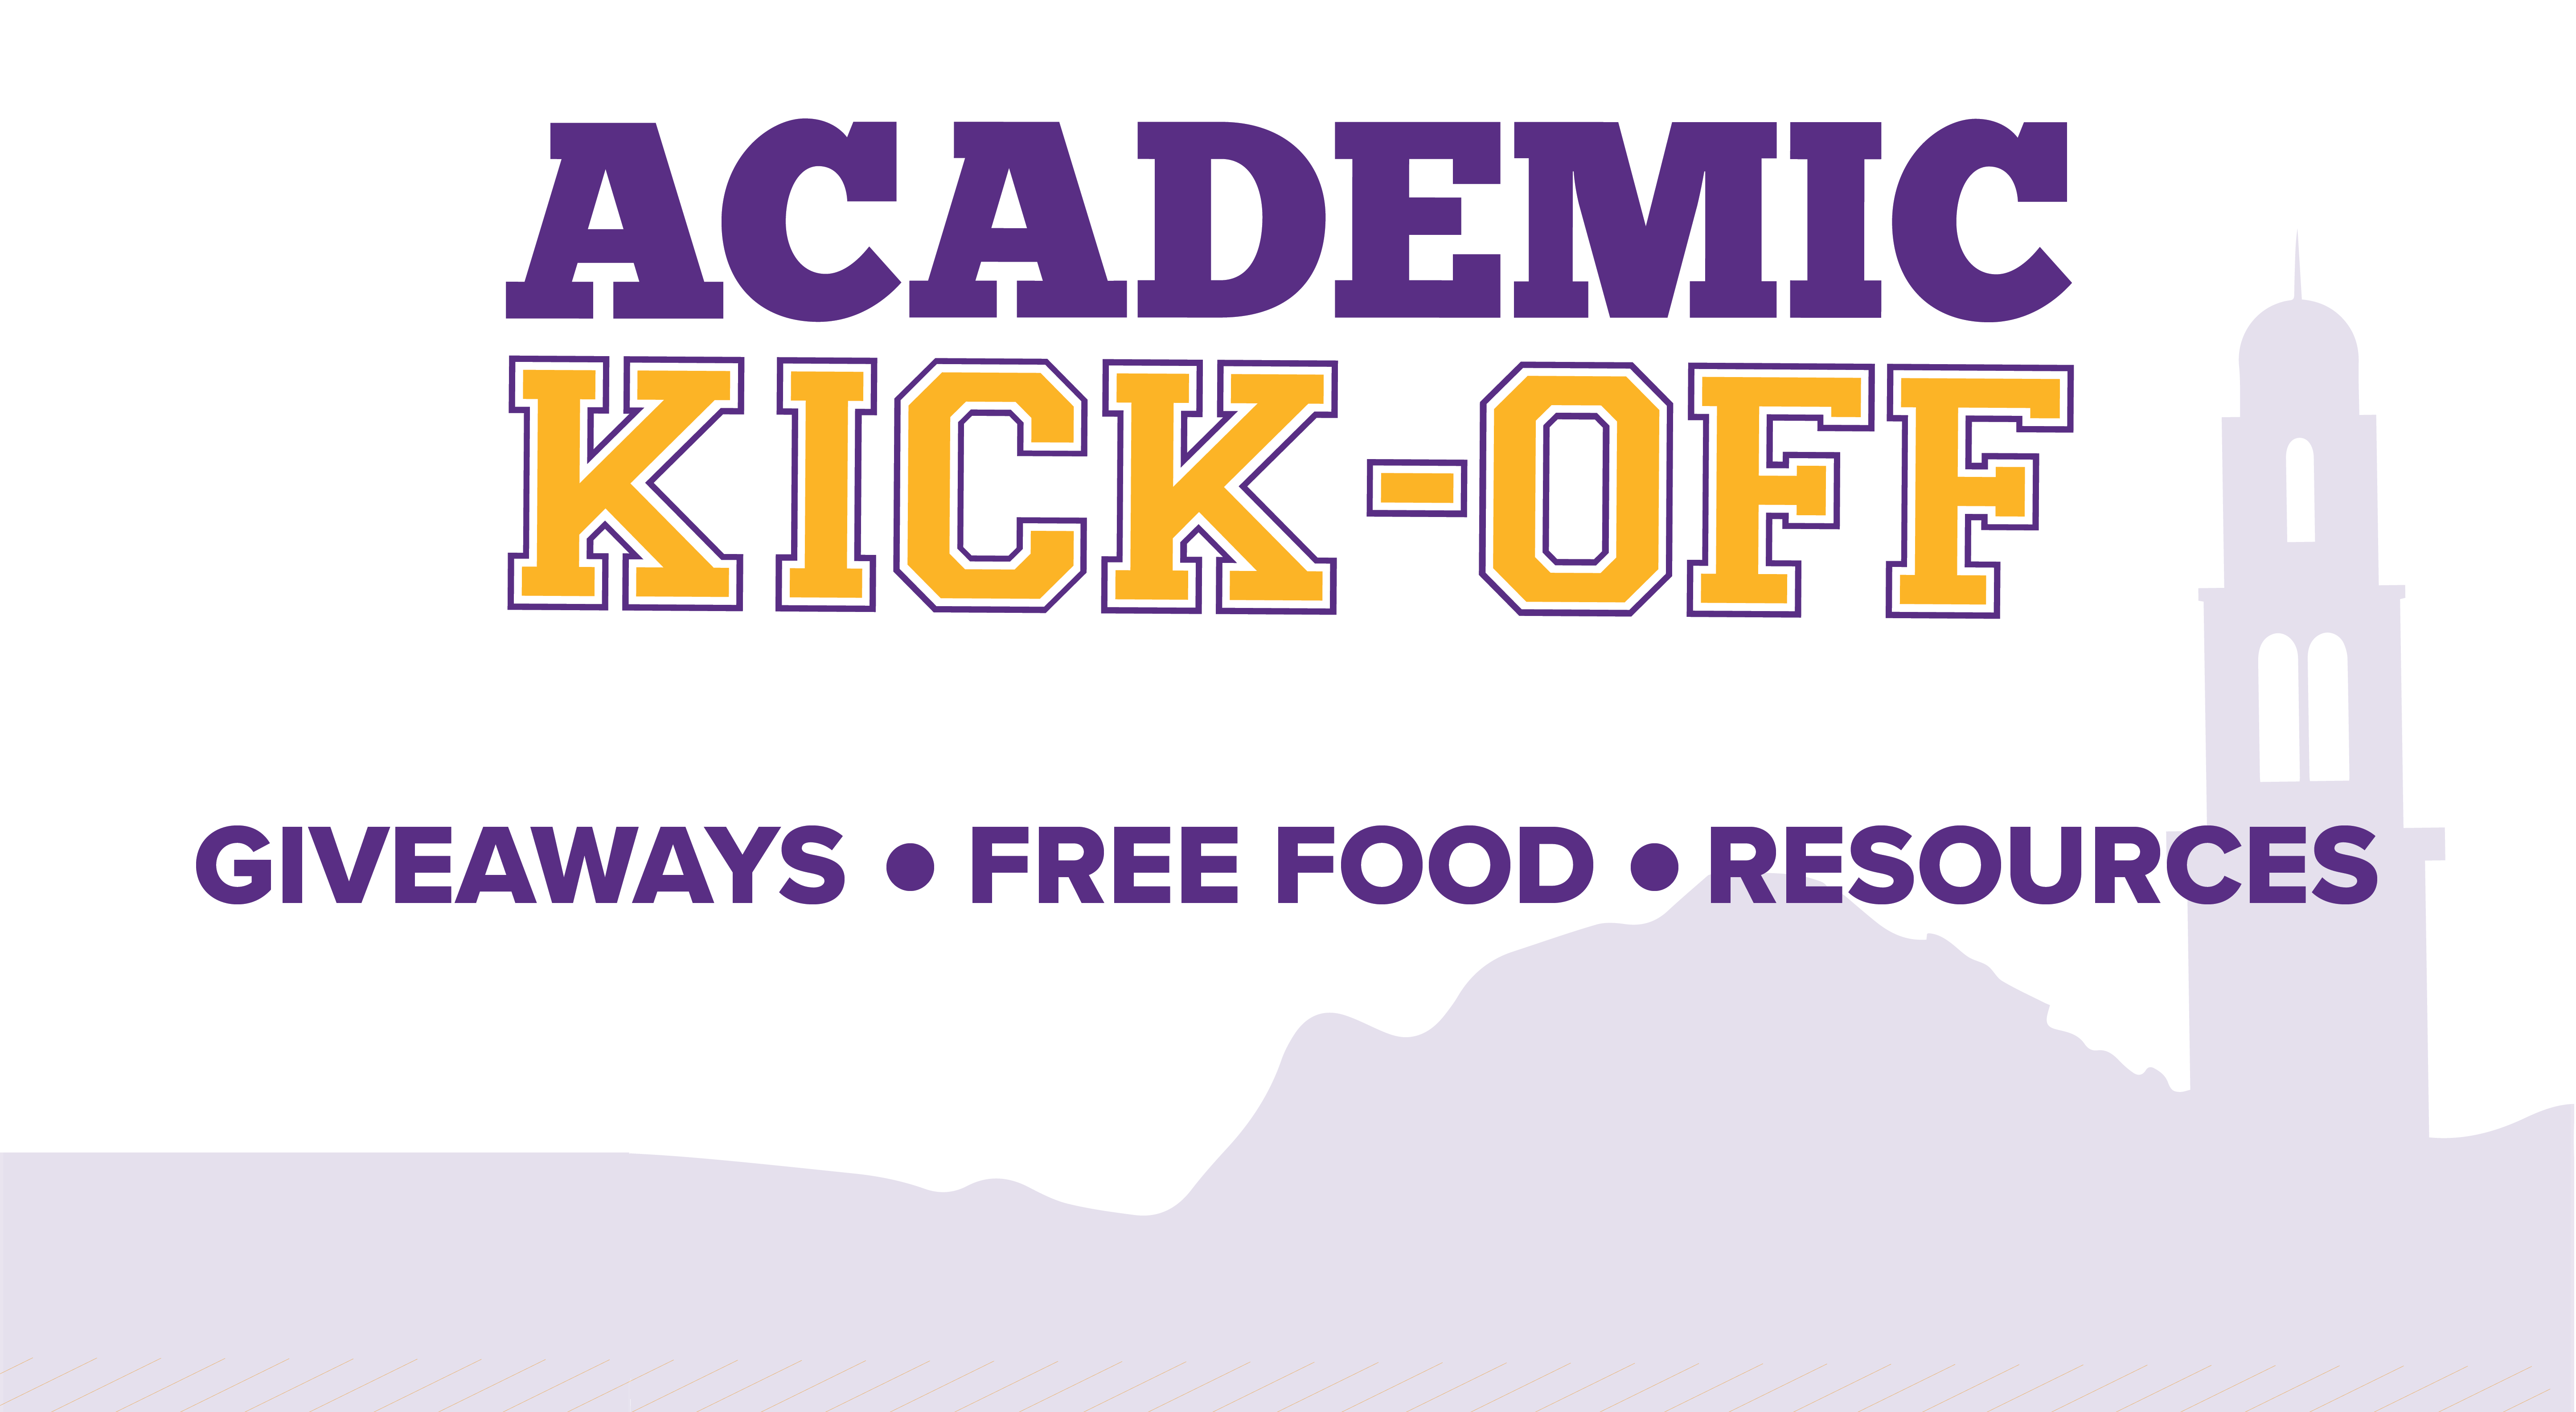 Academic Kick-Off Giveaways, Free Food, Resources. September 21, 11-1pm at Tower Drive